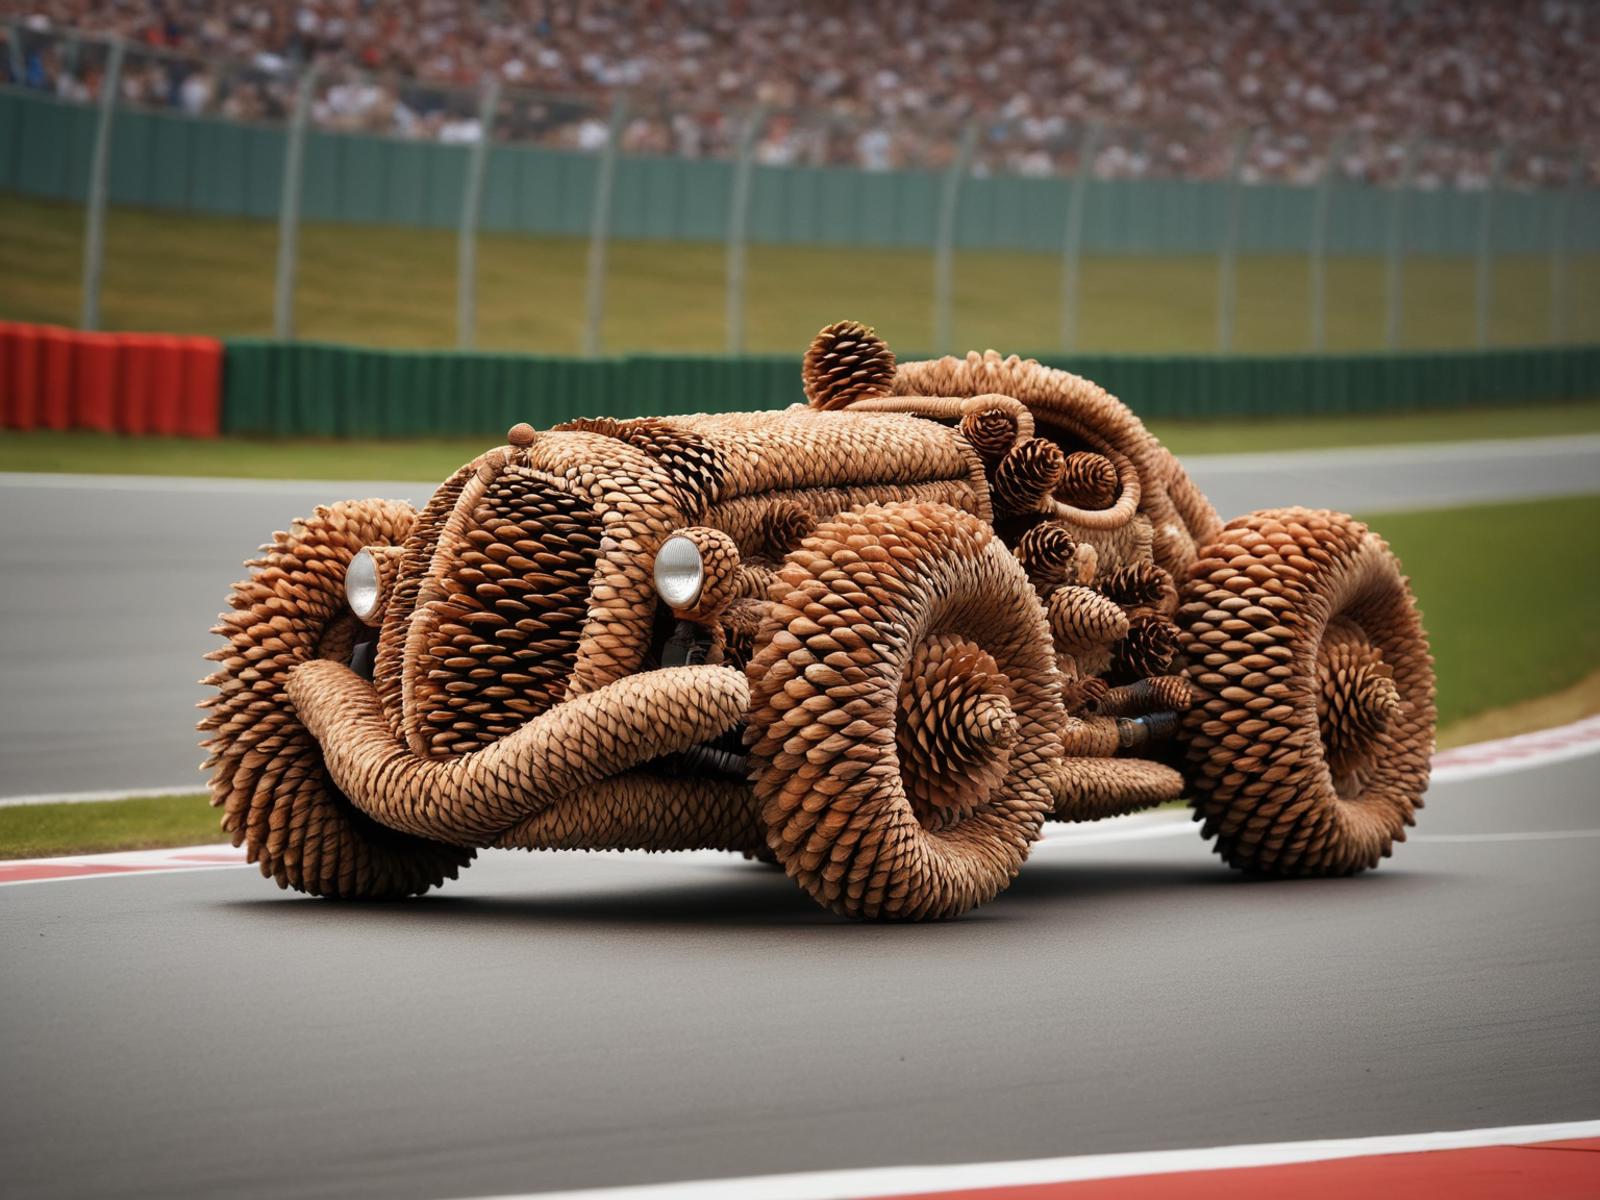 A wooden race car with spikes on the wheels is driving on a track.